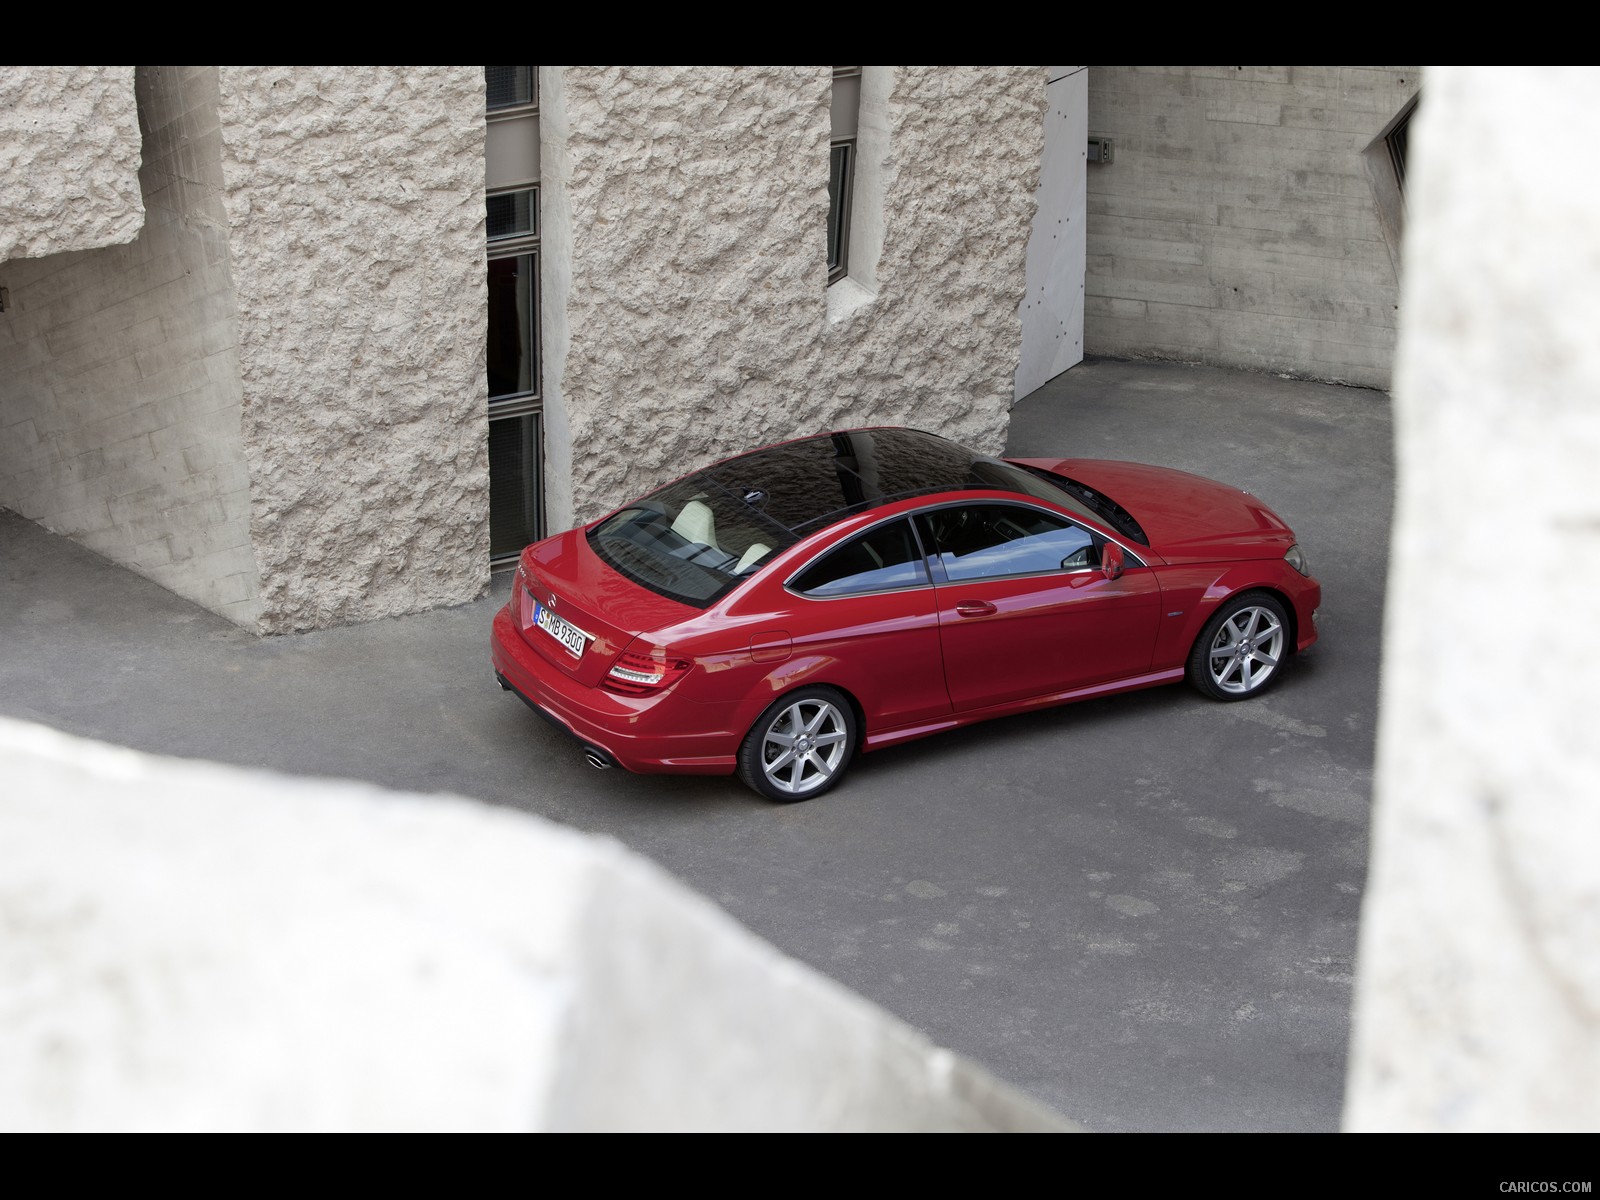 Mercedes-Benz C-Class Coupe (2012)  - Top, #32 of 79